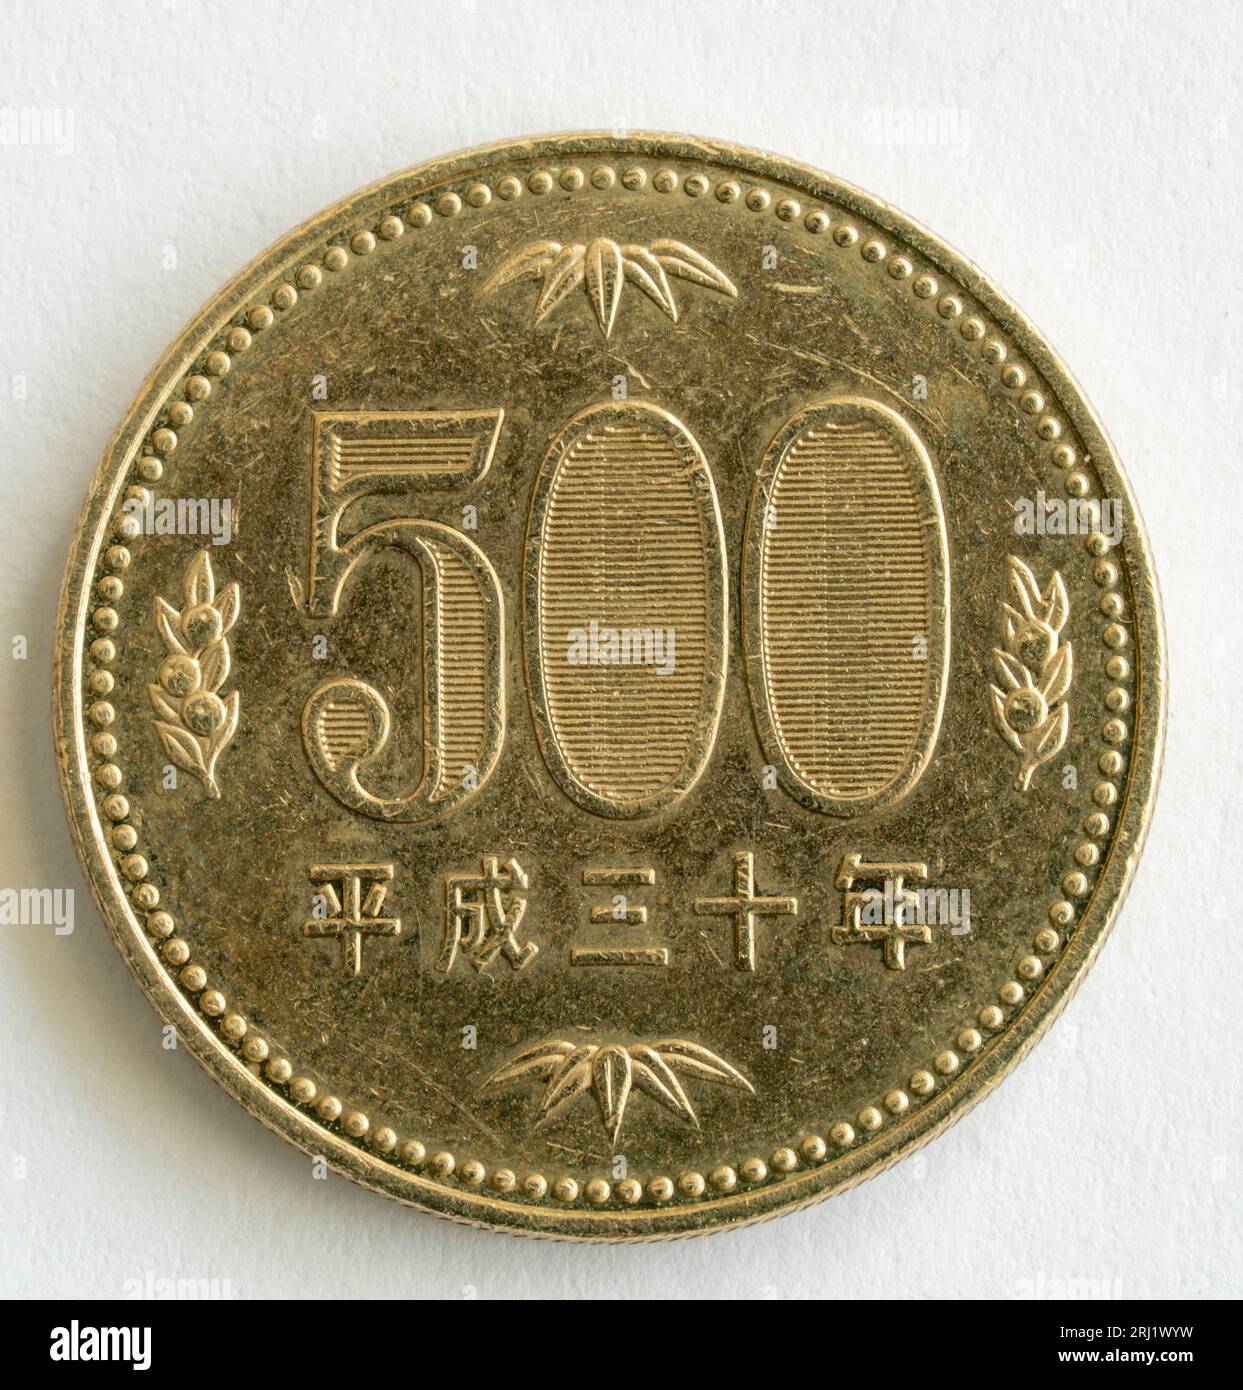 Japanese 500 yen coin minted for the Showa Emperor, Hirohito. It has the value with mandarin oranges on the sides and bamboo leaves above and below. Stock Photo